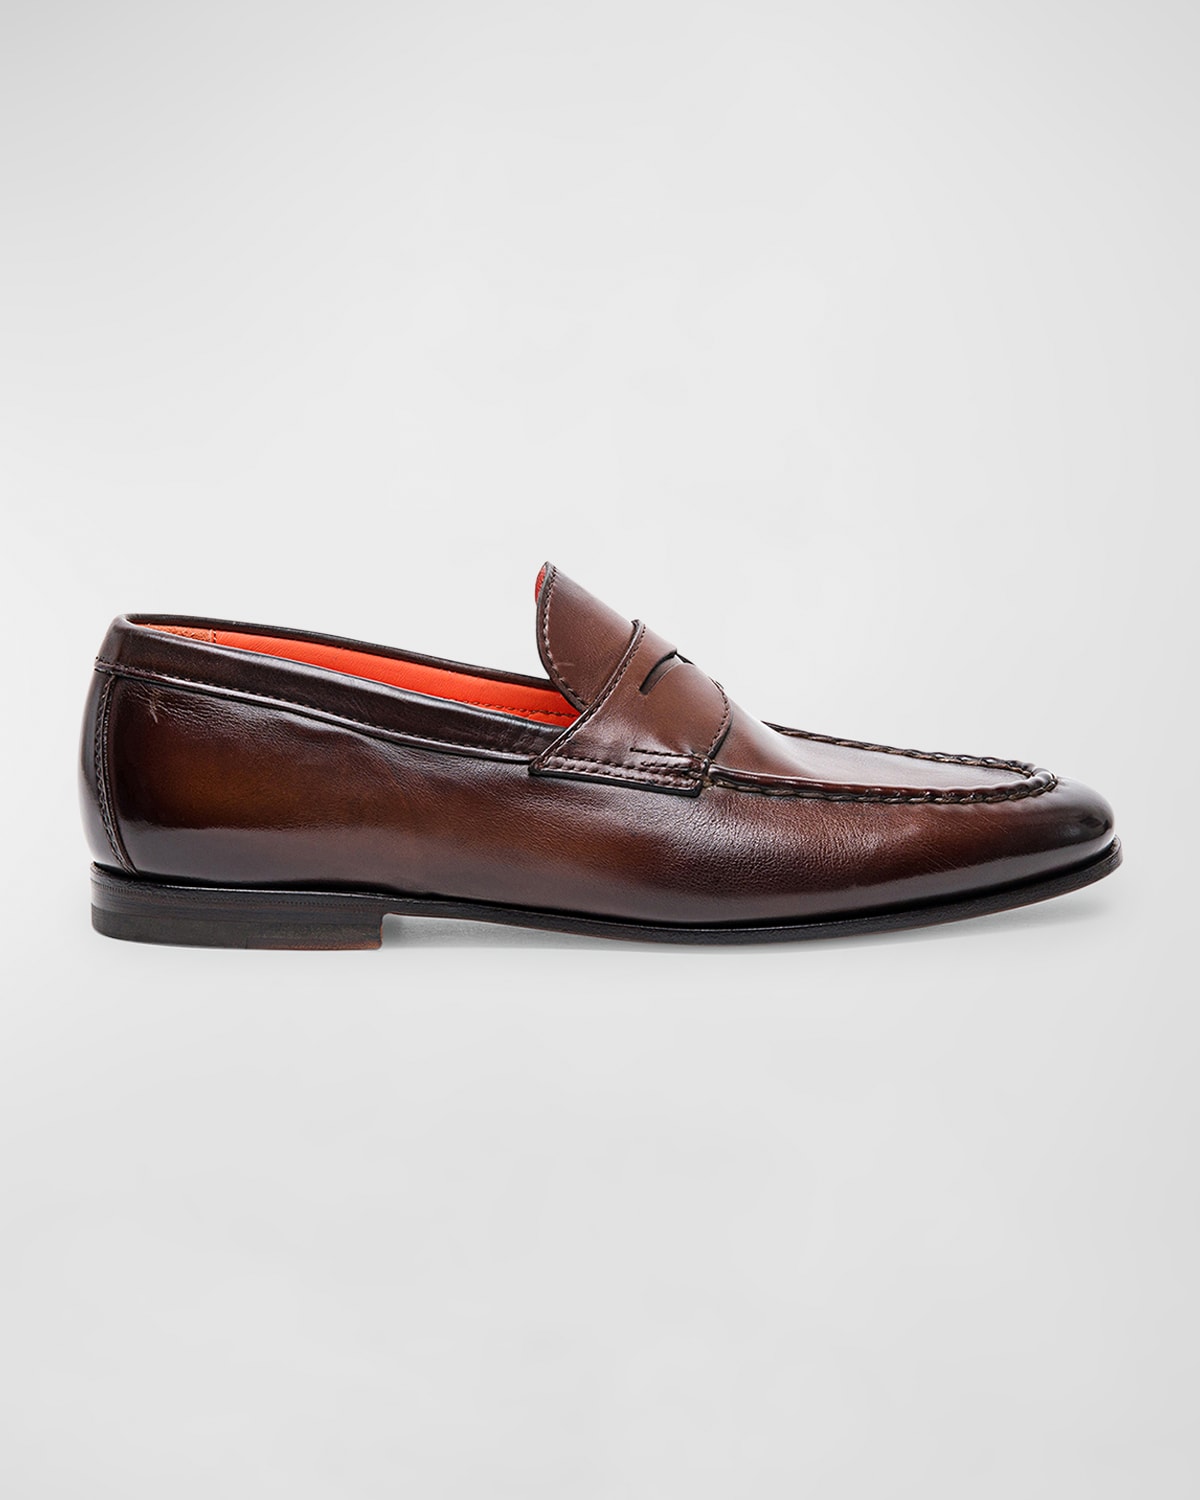 Men's Door Burnished Leather Penny Loafers